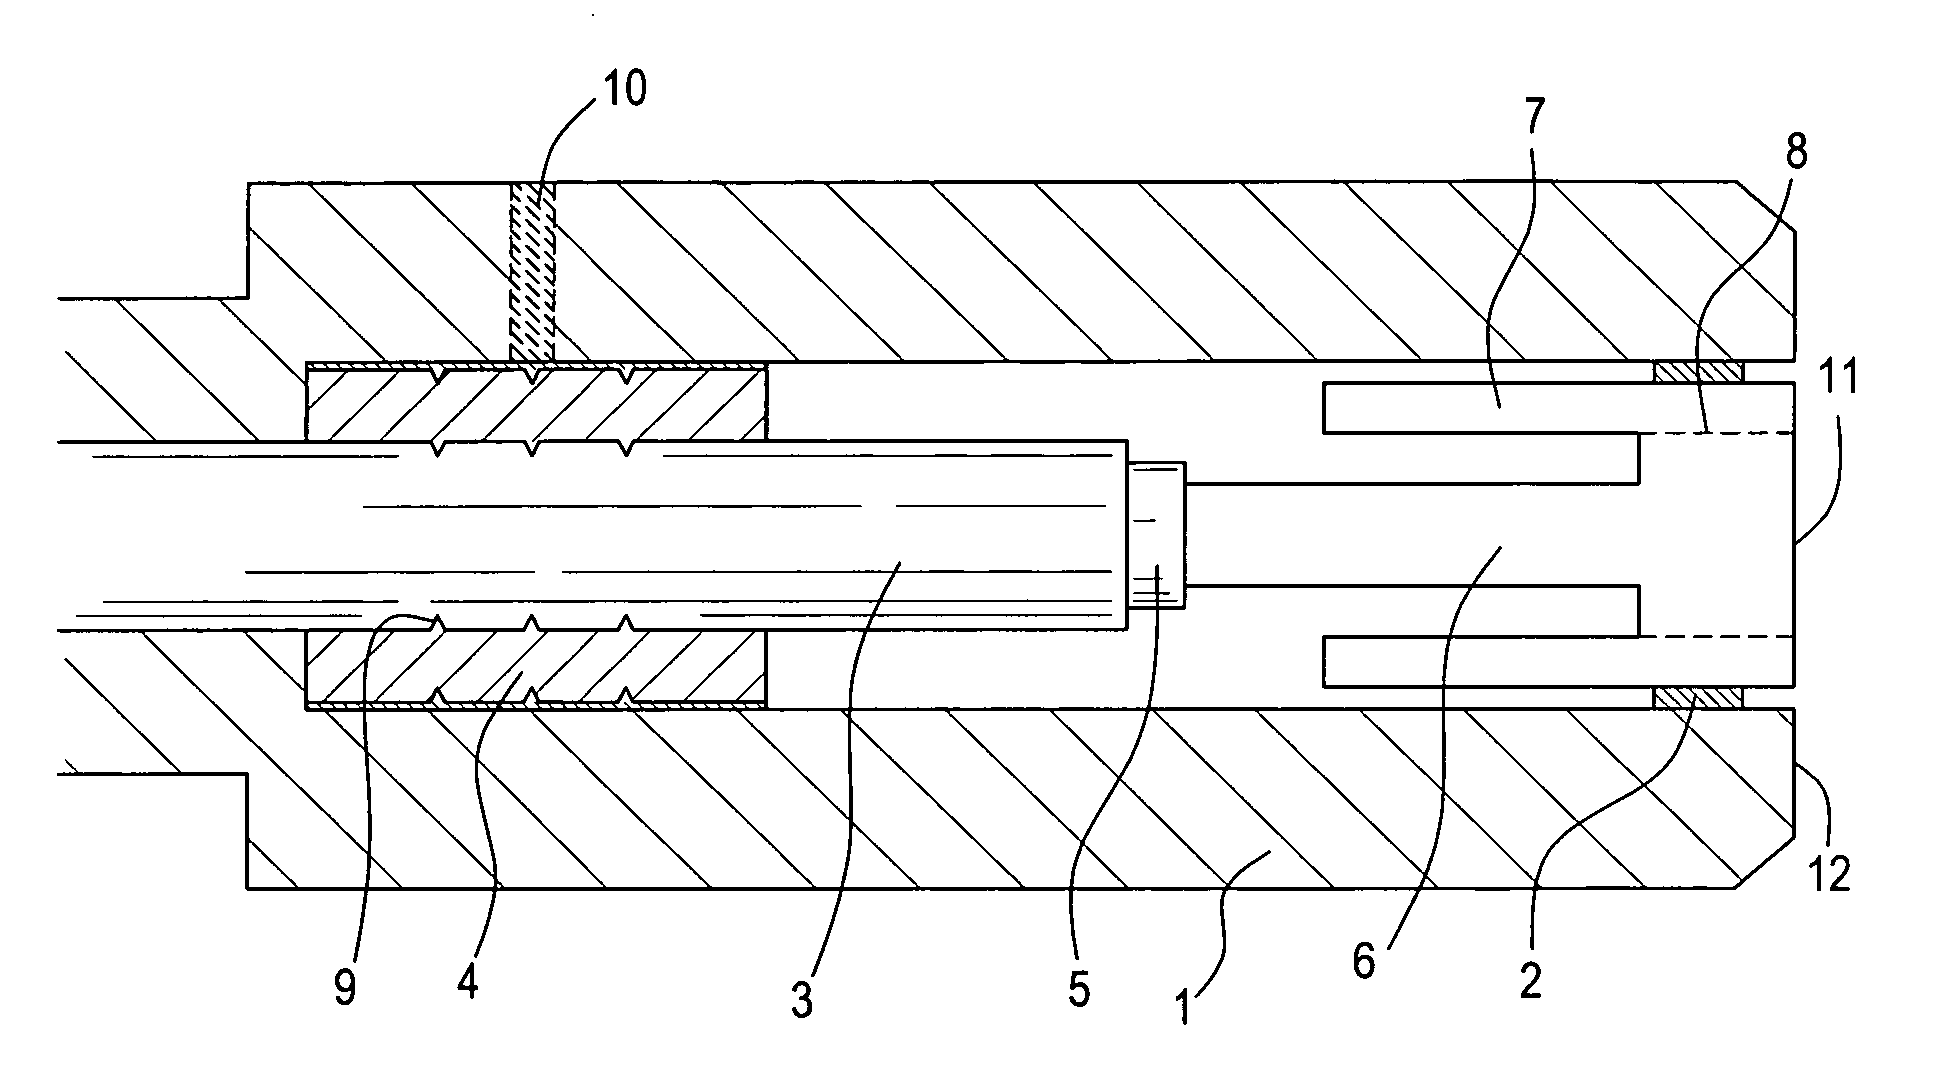 Fiber optic connector for coupling laser energy into small core fibers, and termination method therefor